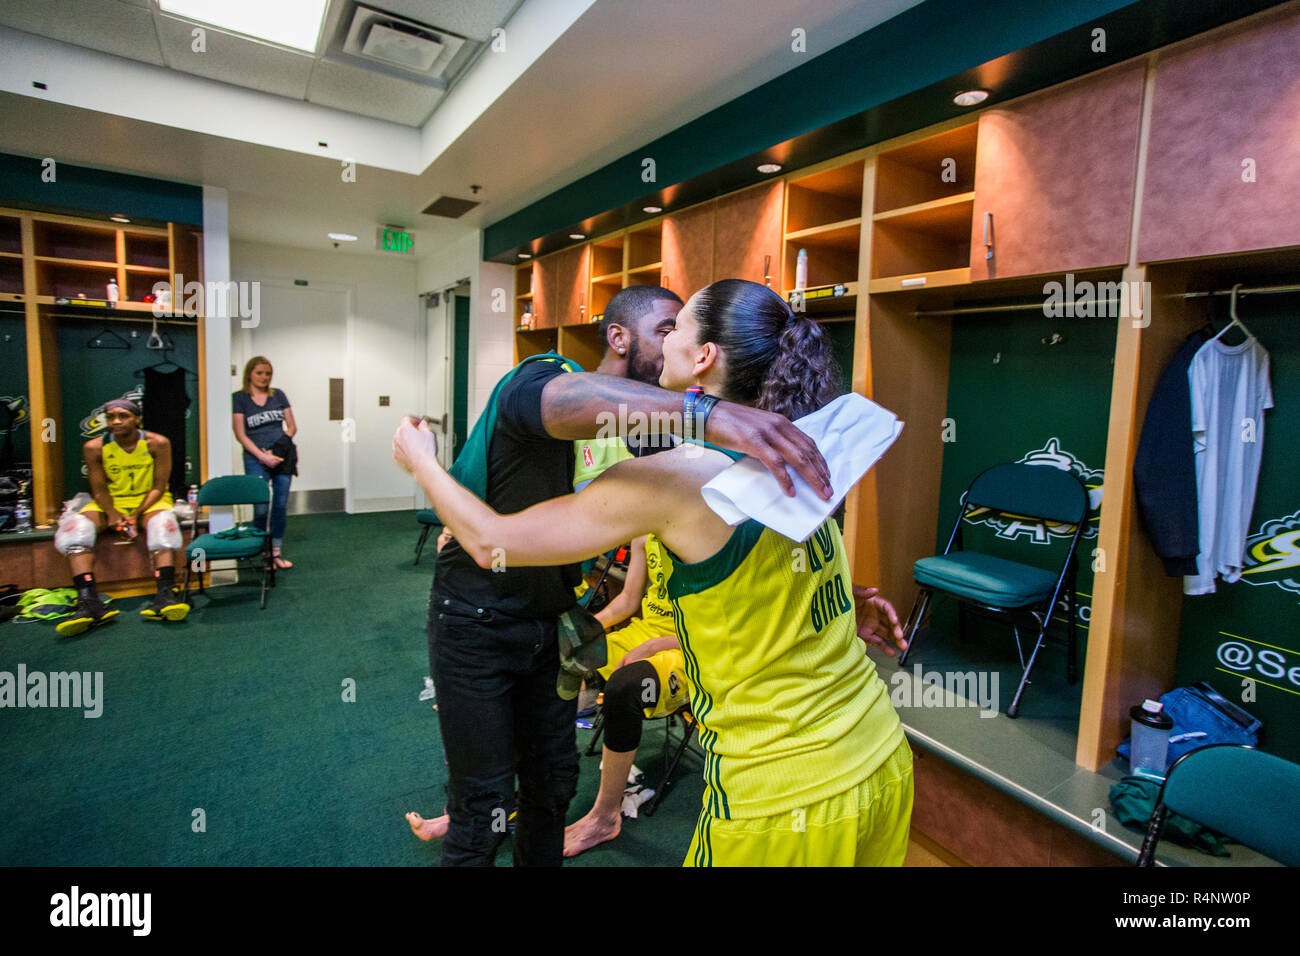 Male and female basketball players embracing in locker room, Seattle, Washington State, USA Stock Photo